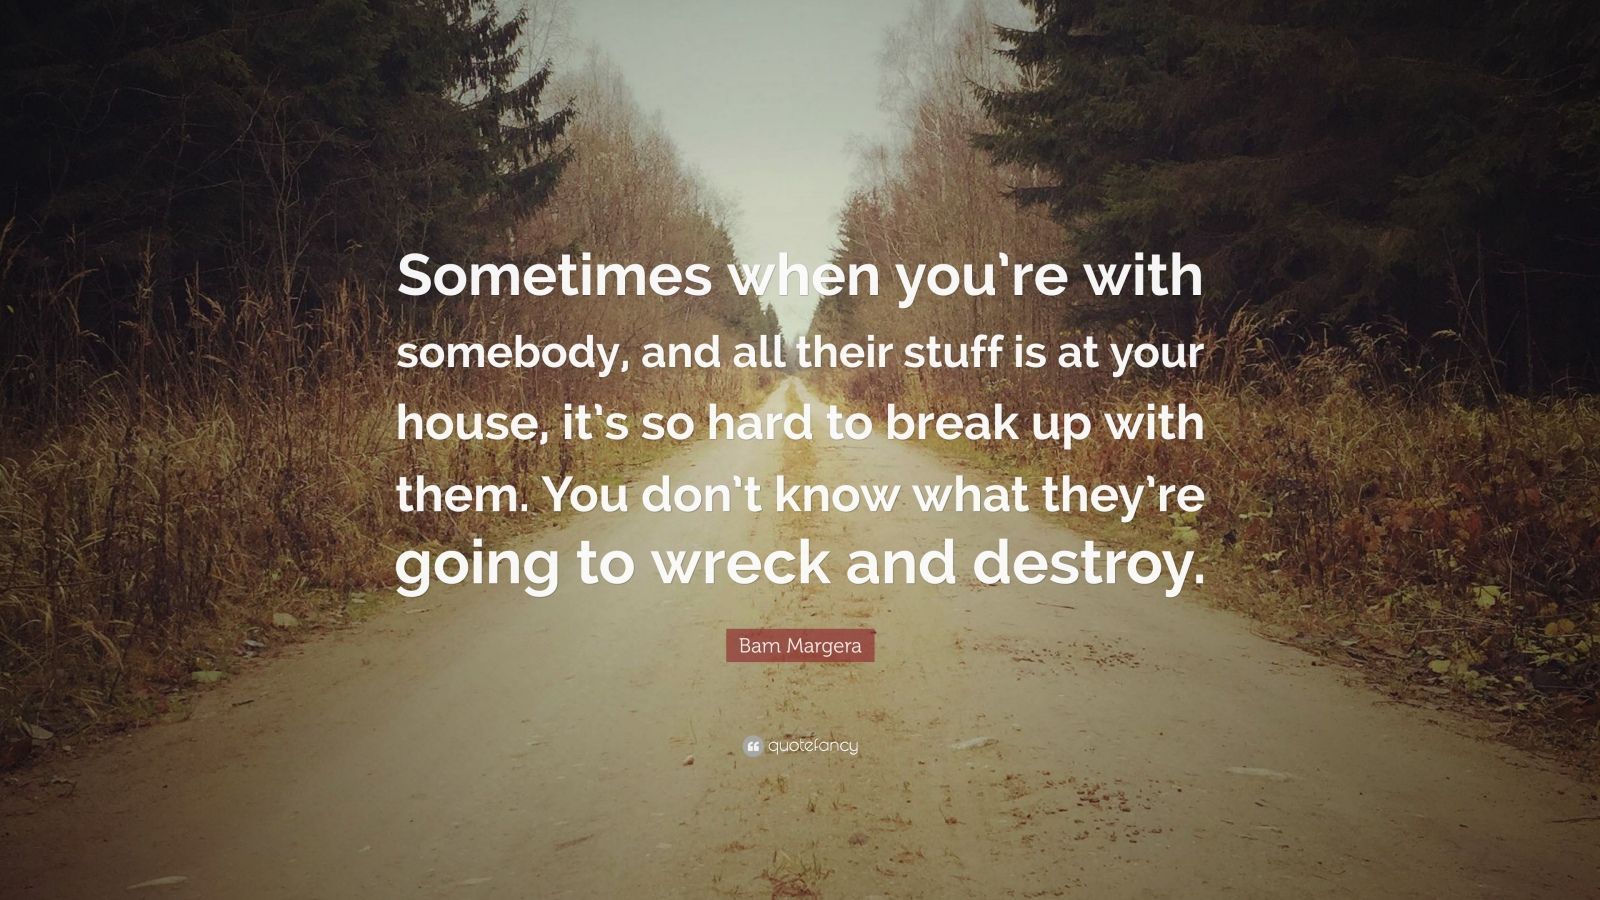 Bam Margera Quote: "Sometimes when you're with somebody ...